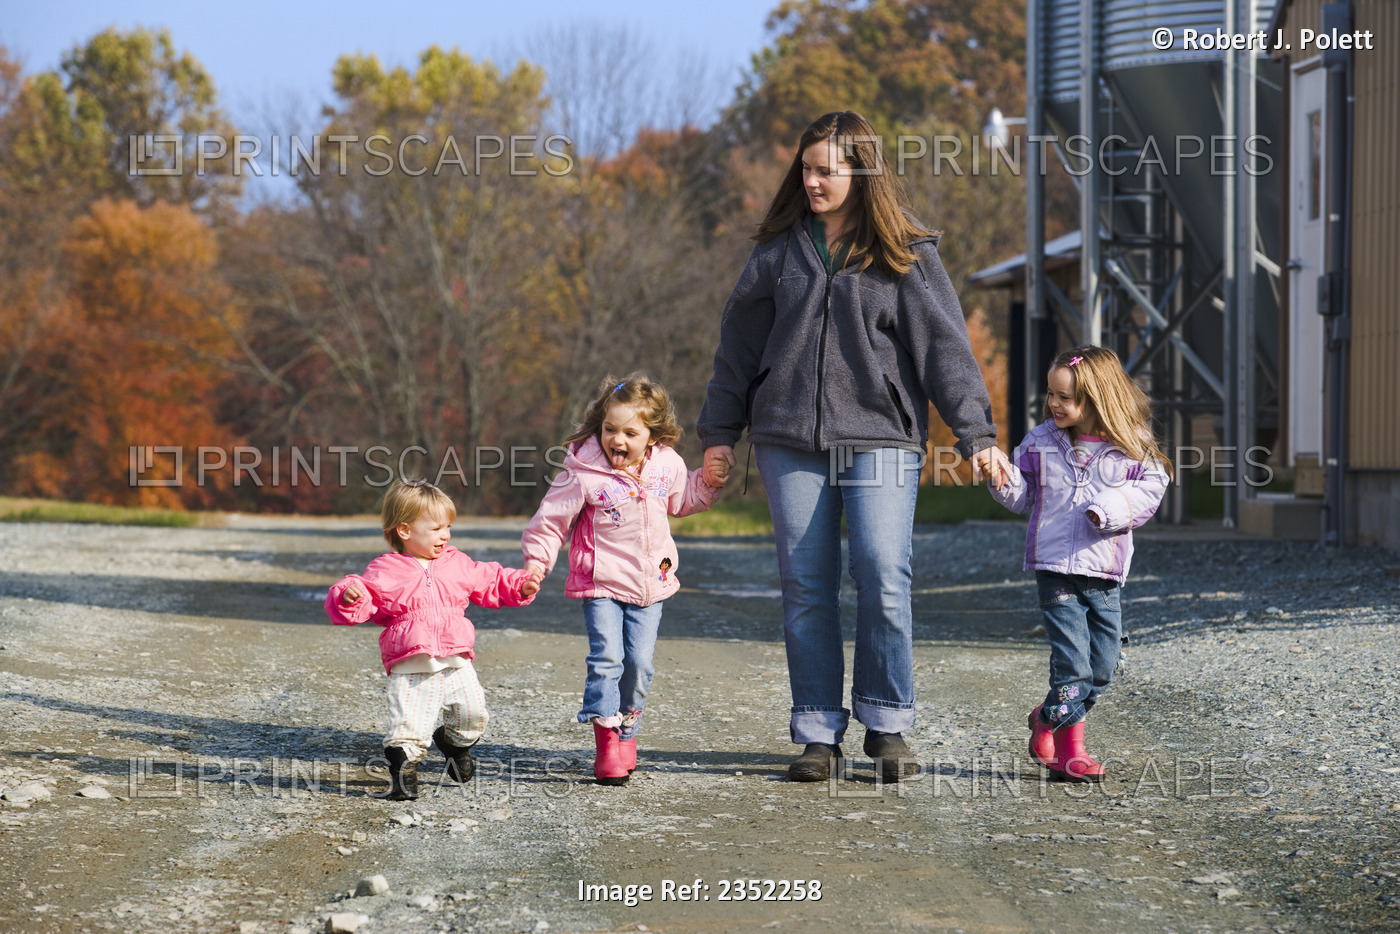 Agriculture - A farm woman walks with her three young daughters along a gravel ...